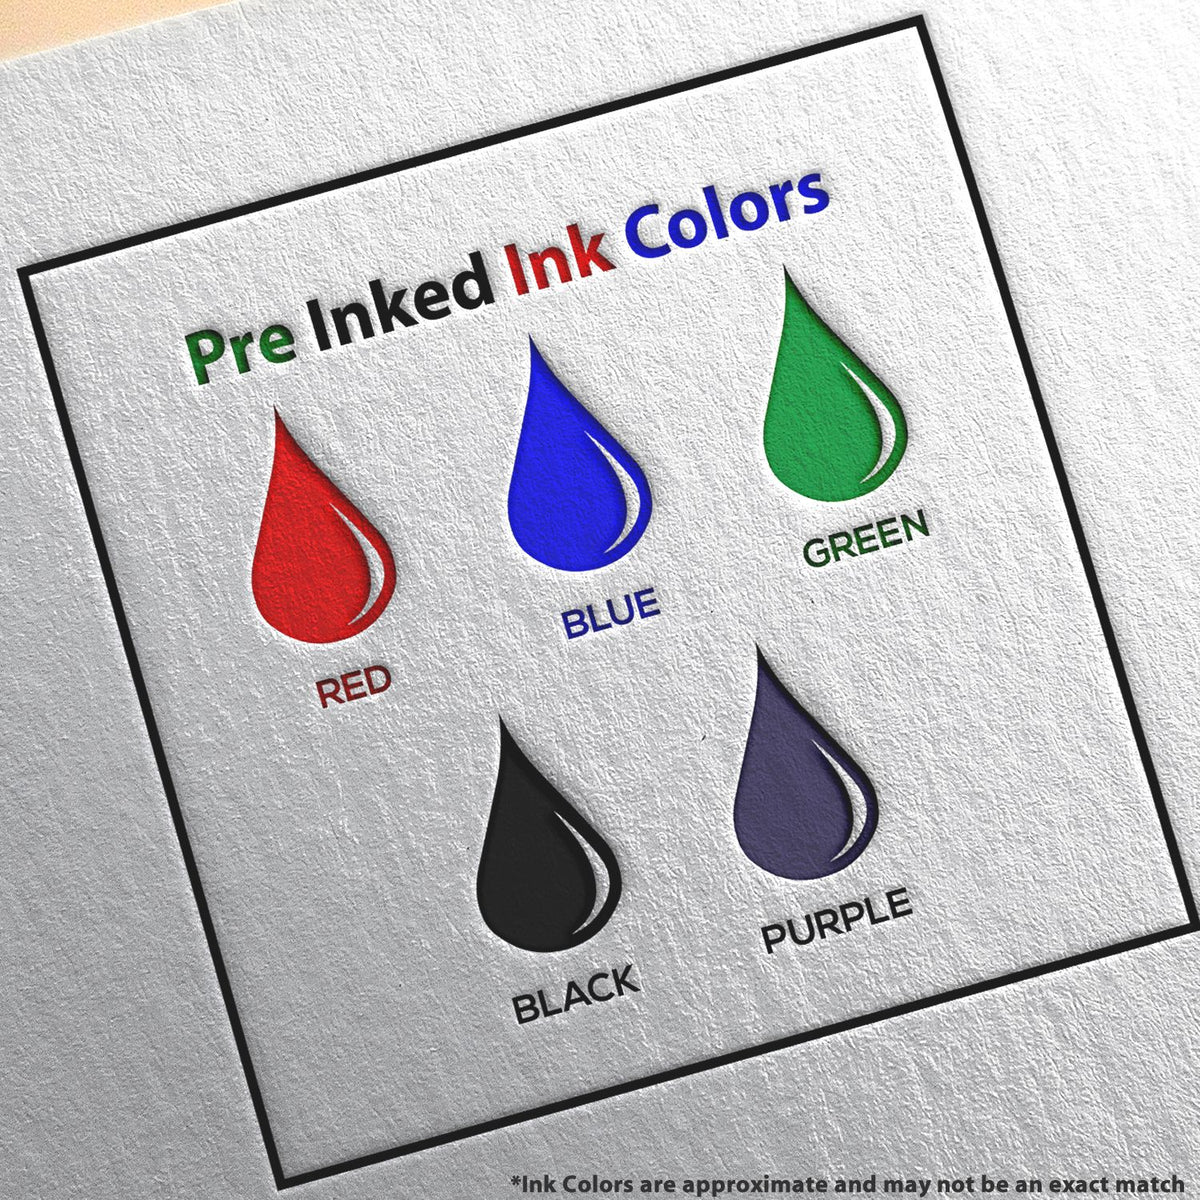 A picture showing the different ink colors or hues available for the Slim Pre-Inked North Dakota Land Surveyor Seal Stamp product.